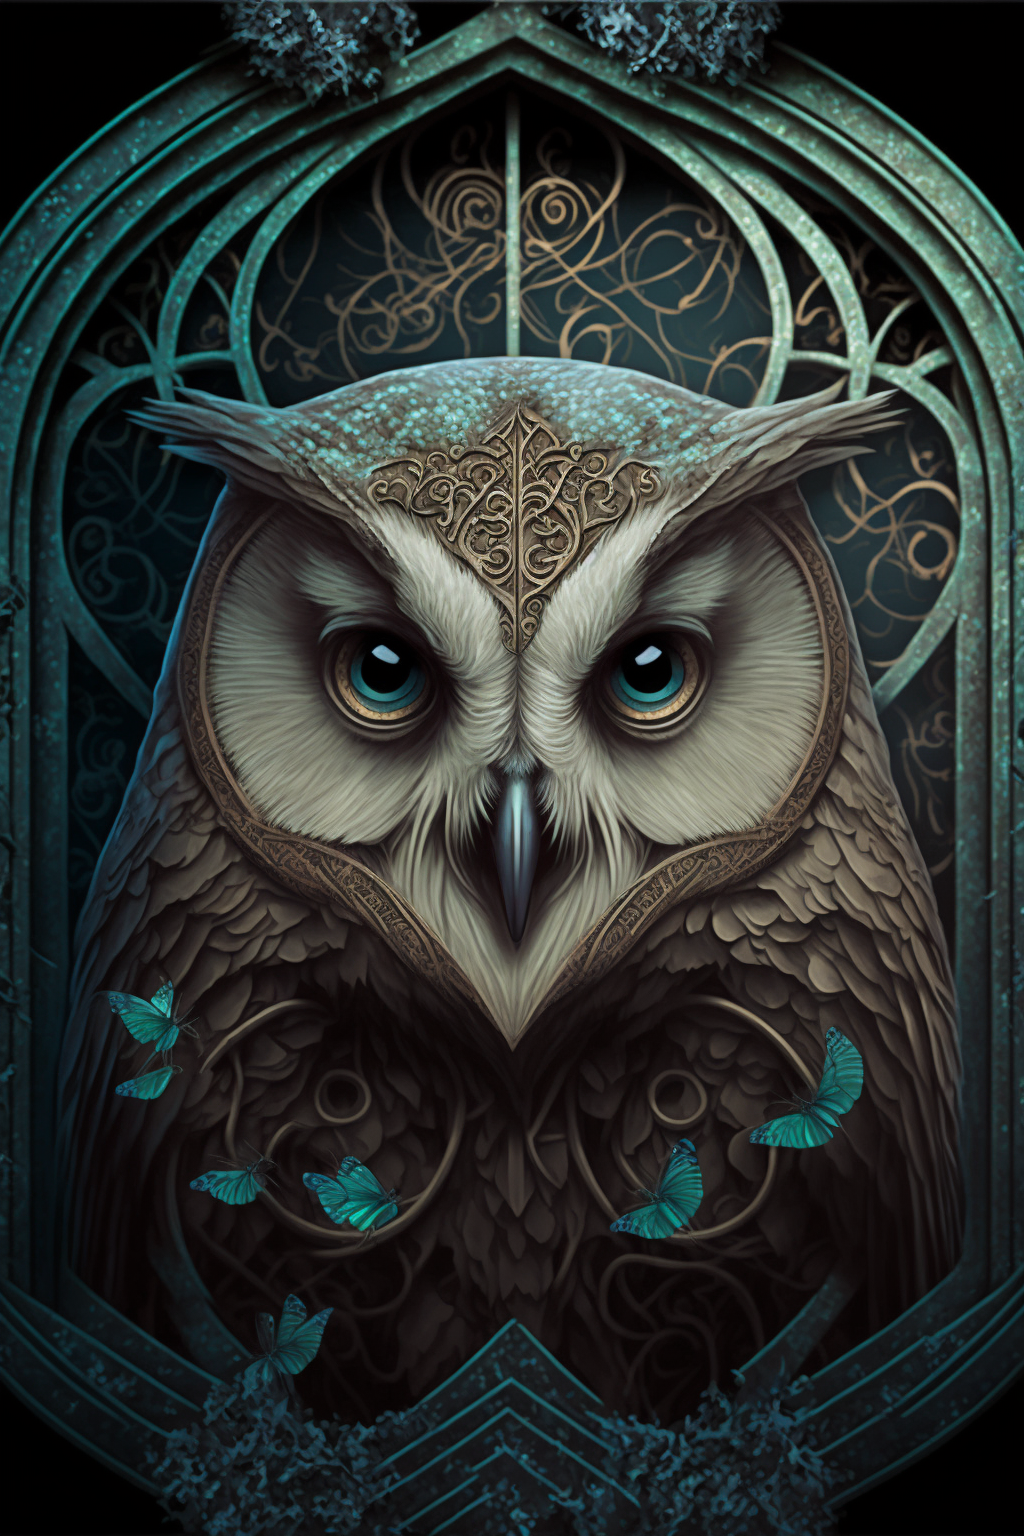 Owl in the style of Gothic Surrealist Symbolism 1